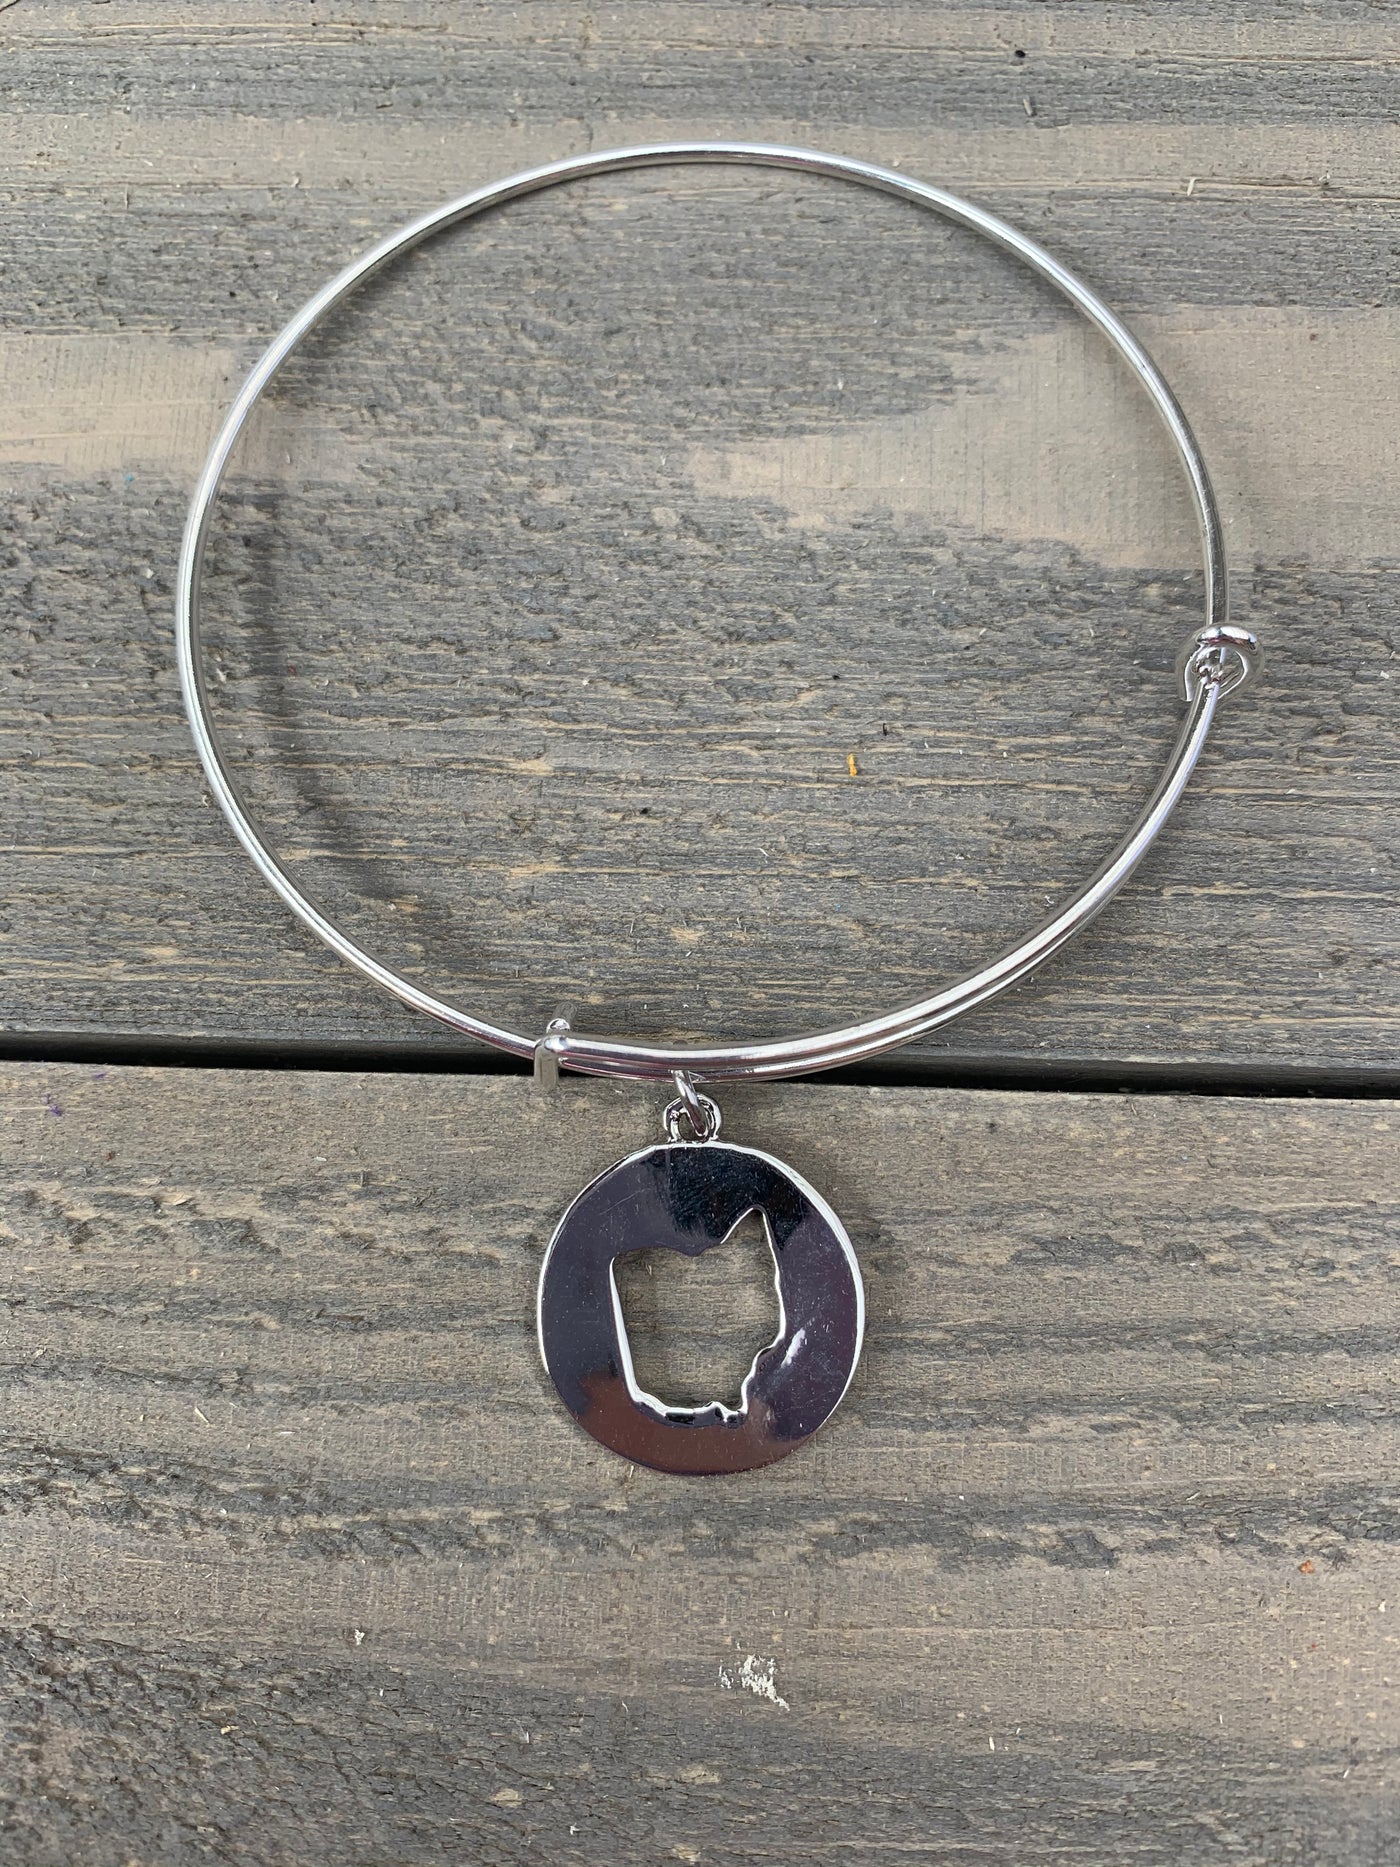 Round Silver Ohio Cutout Bangle Bracelet - Jill's Jewels | Unique, Handcrafted, Trendy, And Fun Jewelry